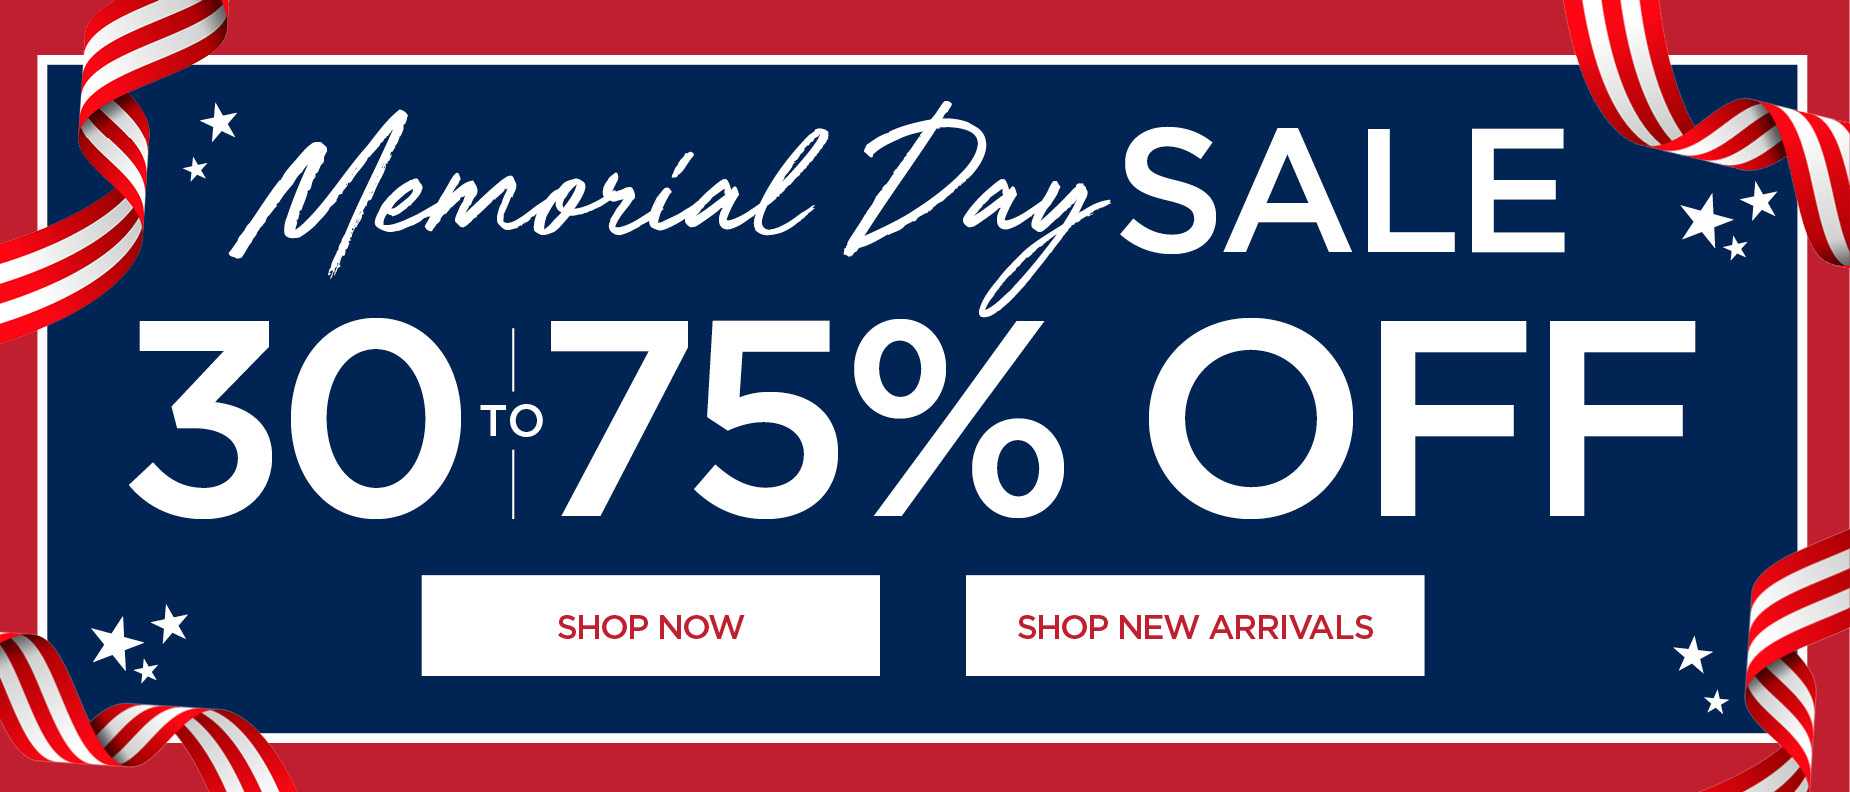 Memorial Day Sale. Shop now for 30 to 75% OFF